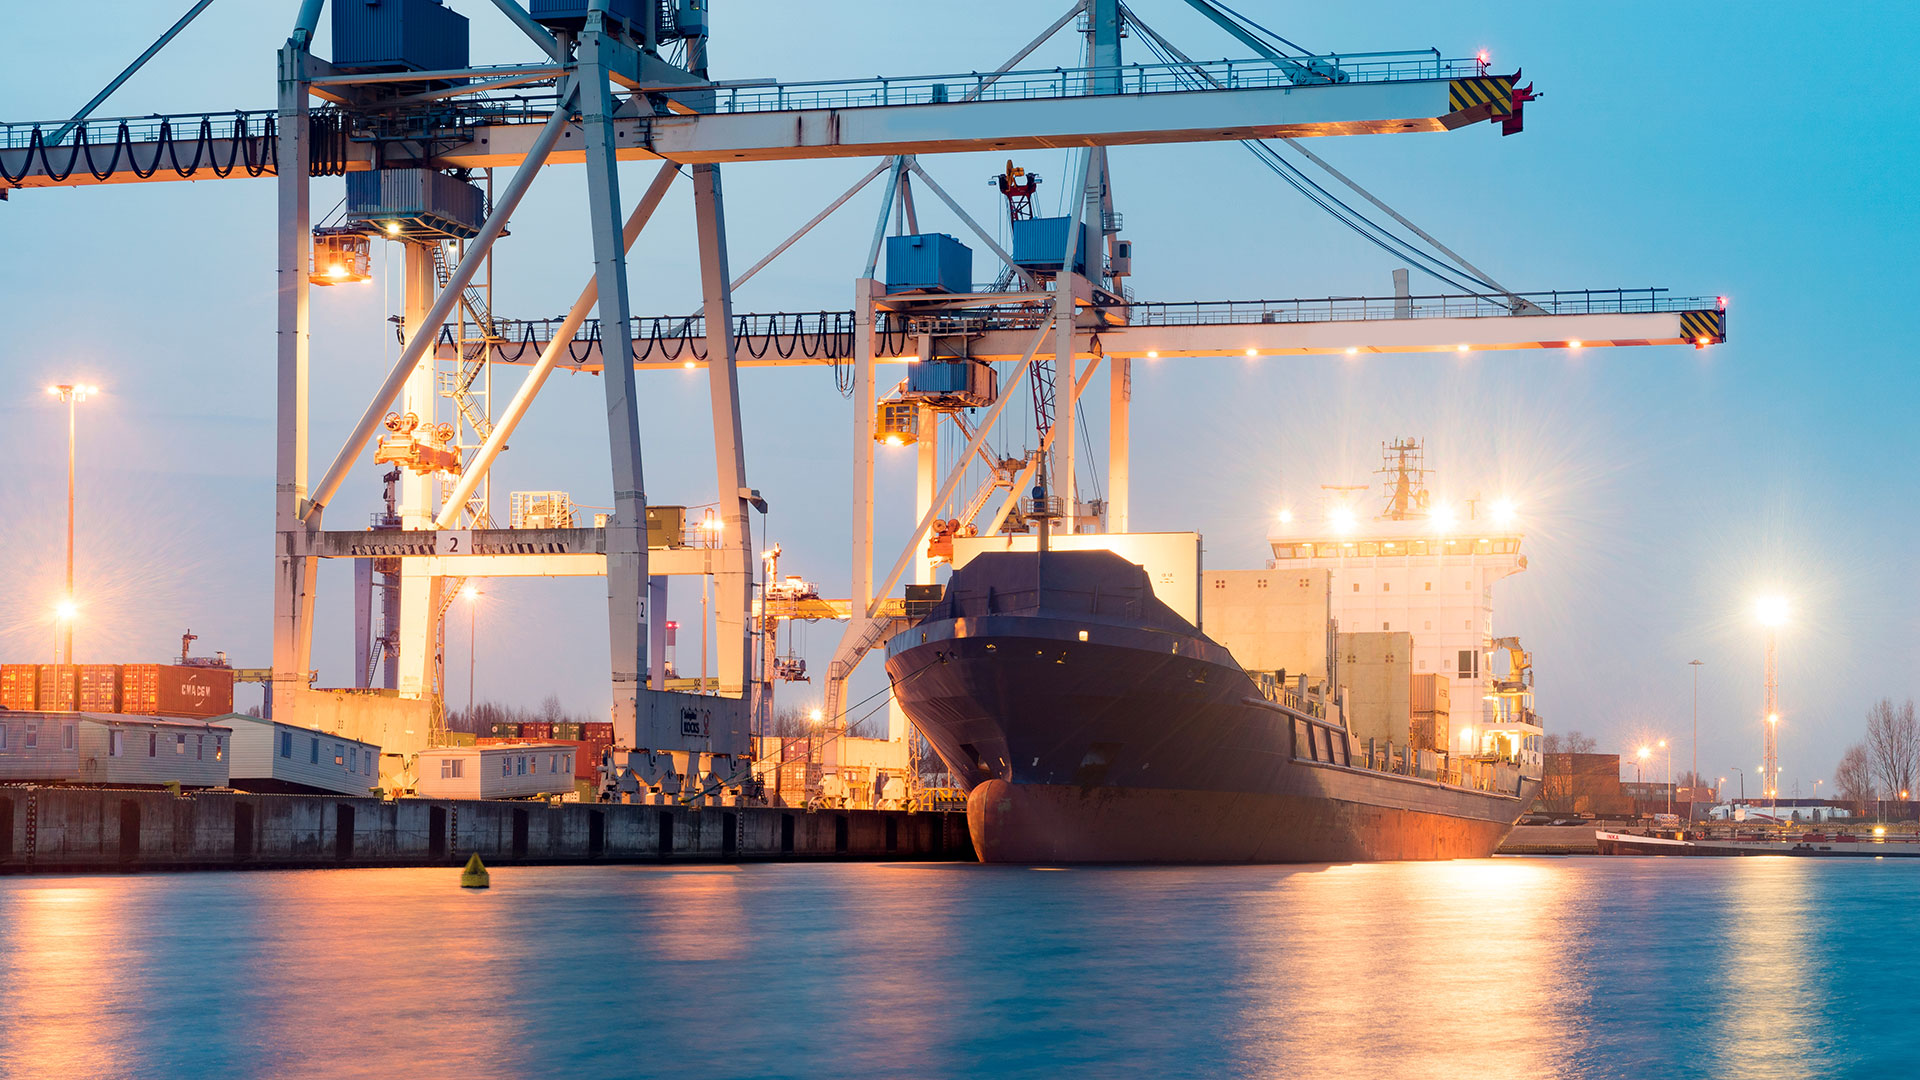 Trends for sustainable ports and shipping